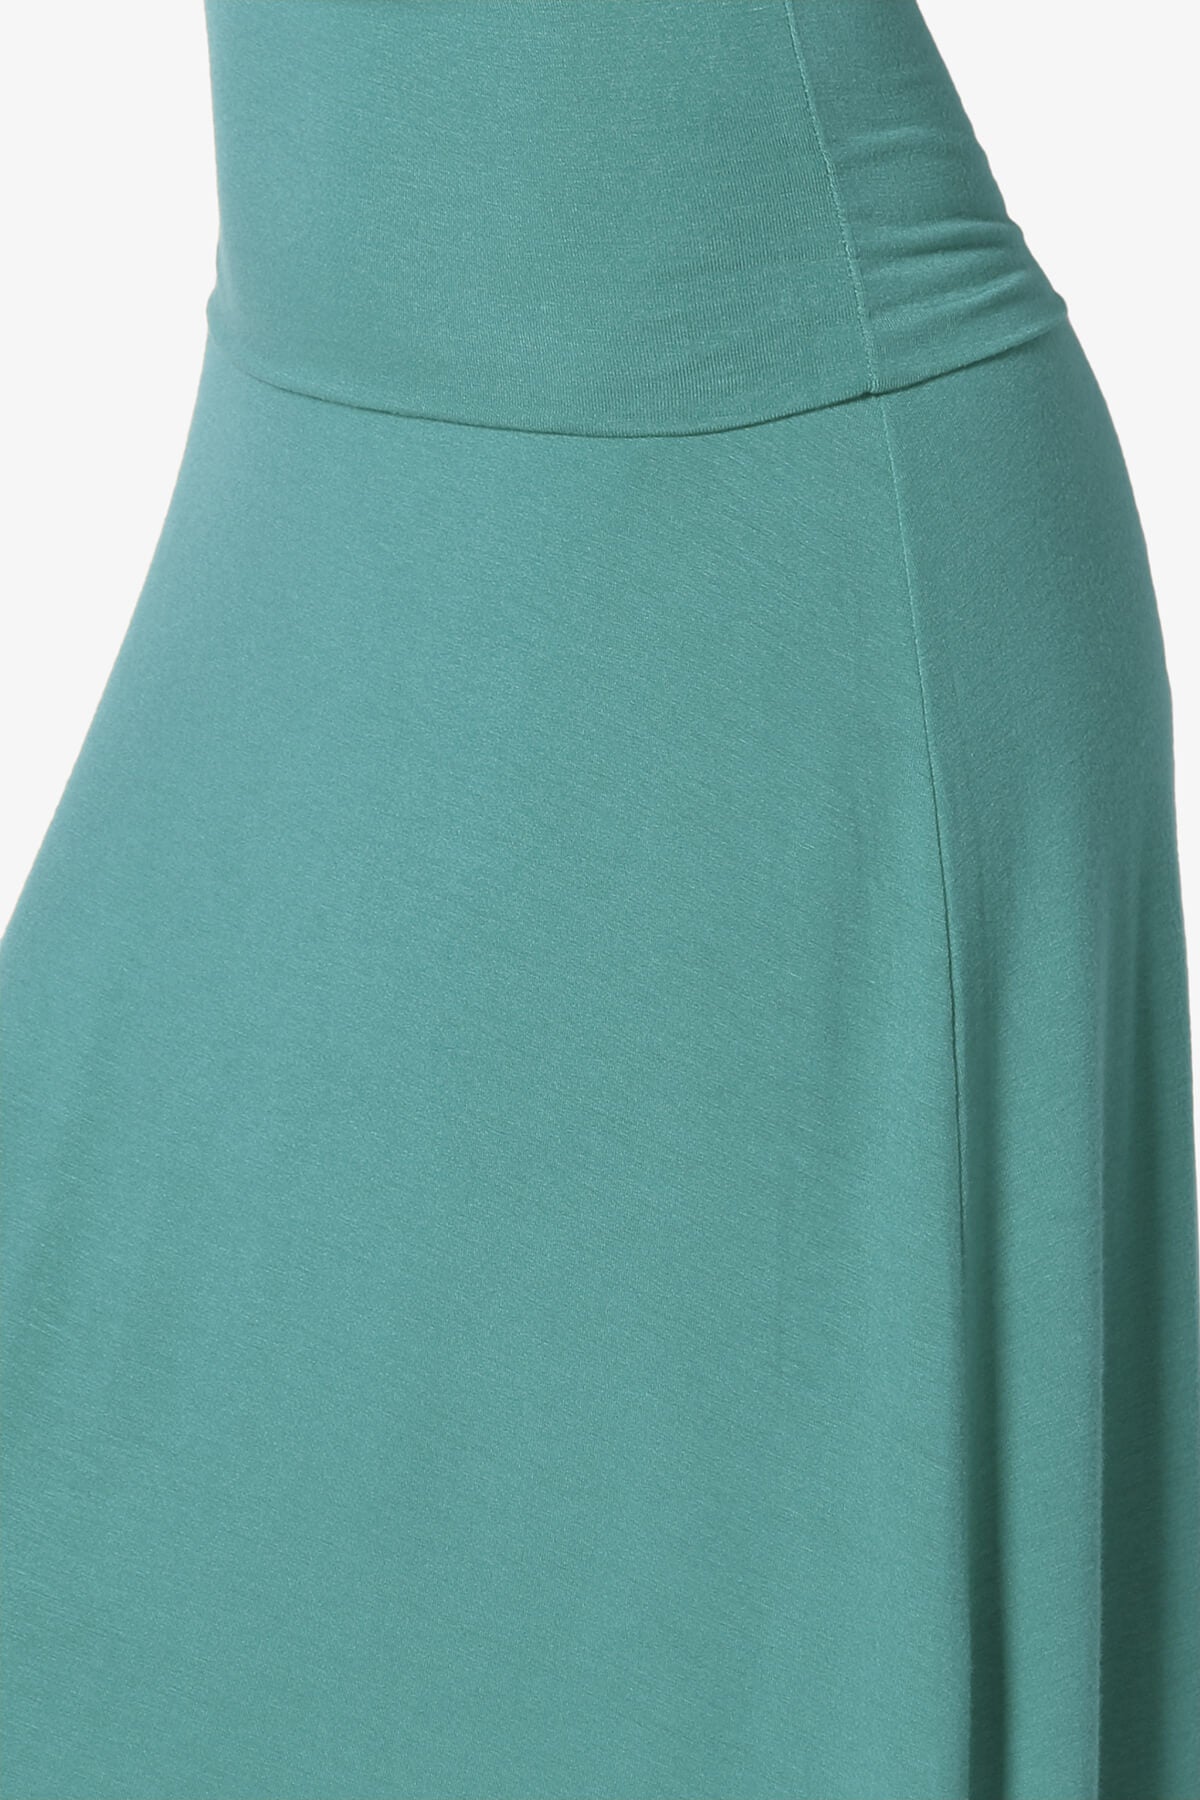 Marlow Jersey Maxi Skirt DUSTY TEAL_5